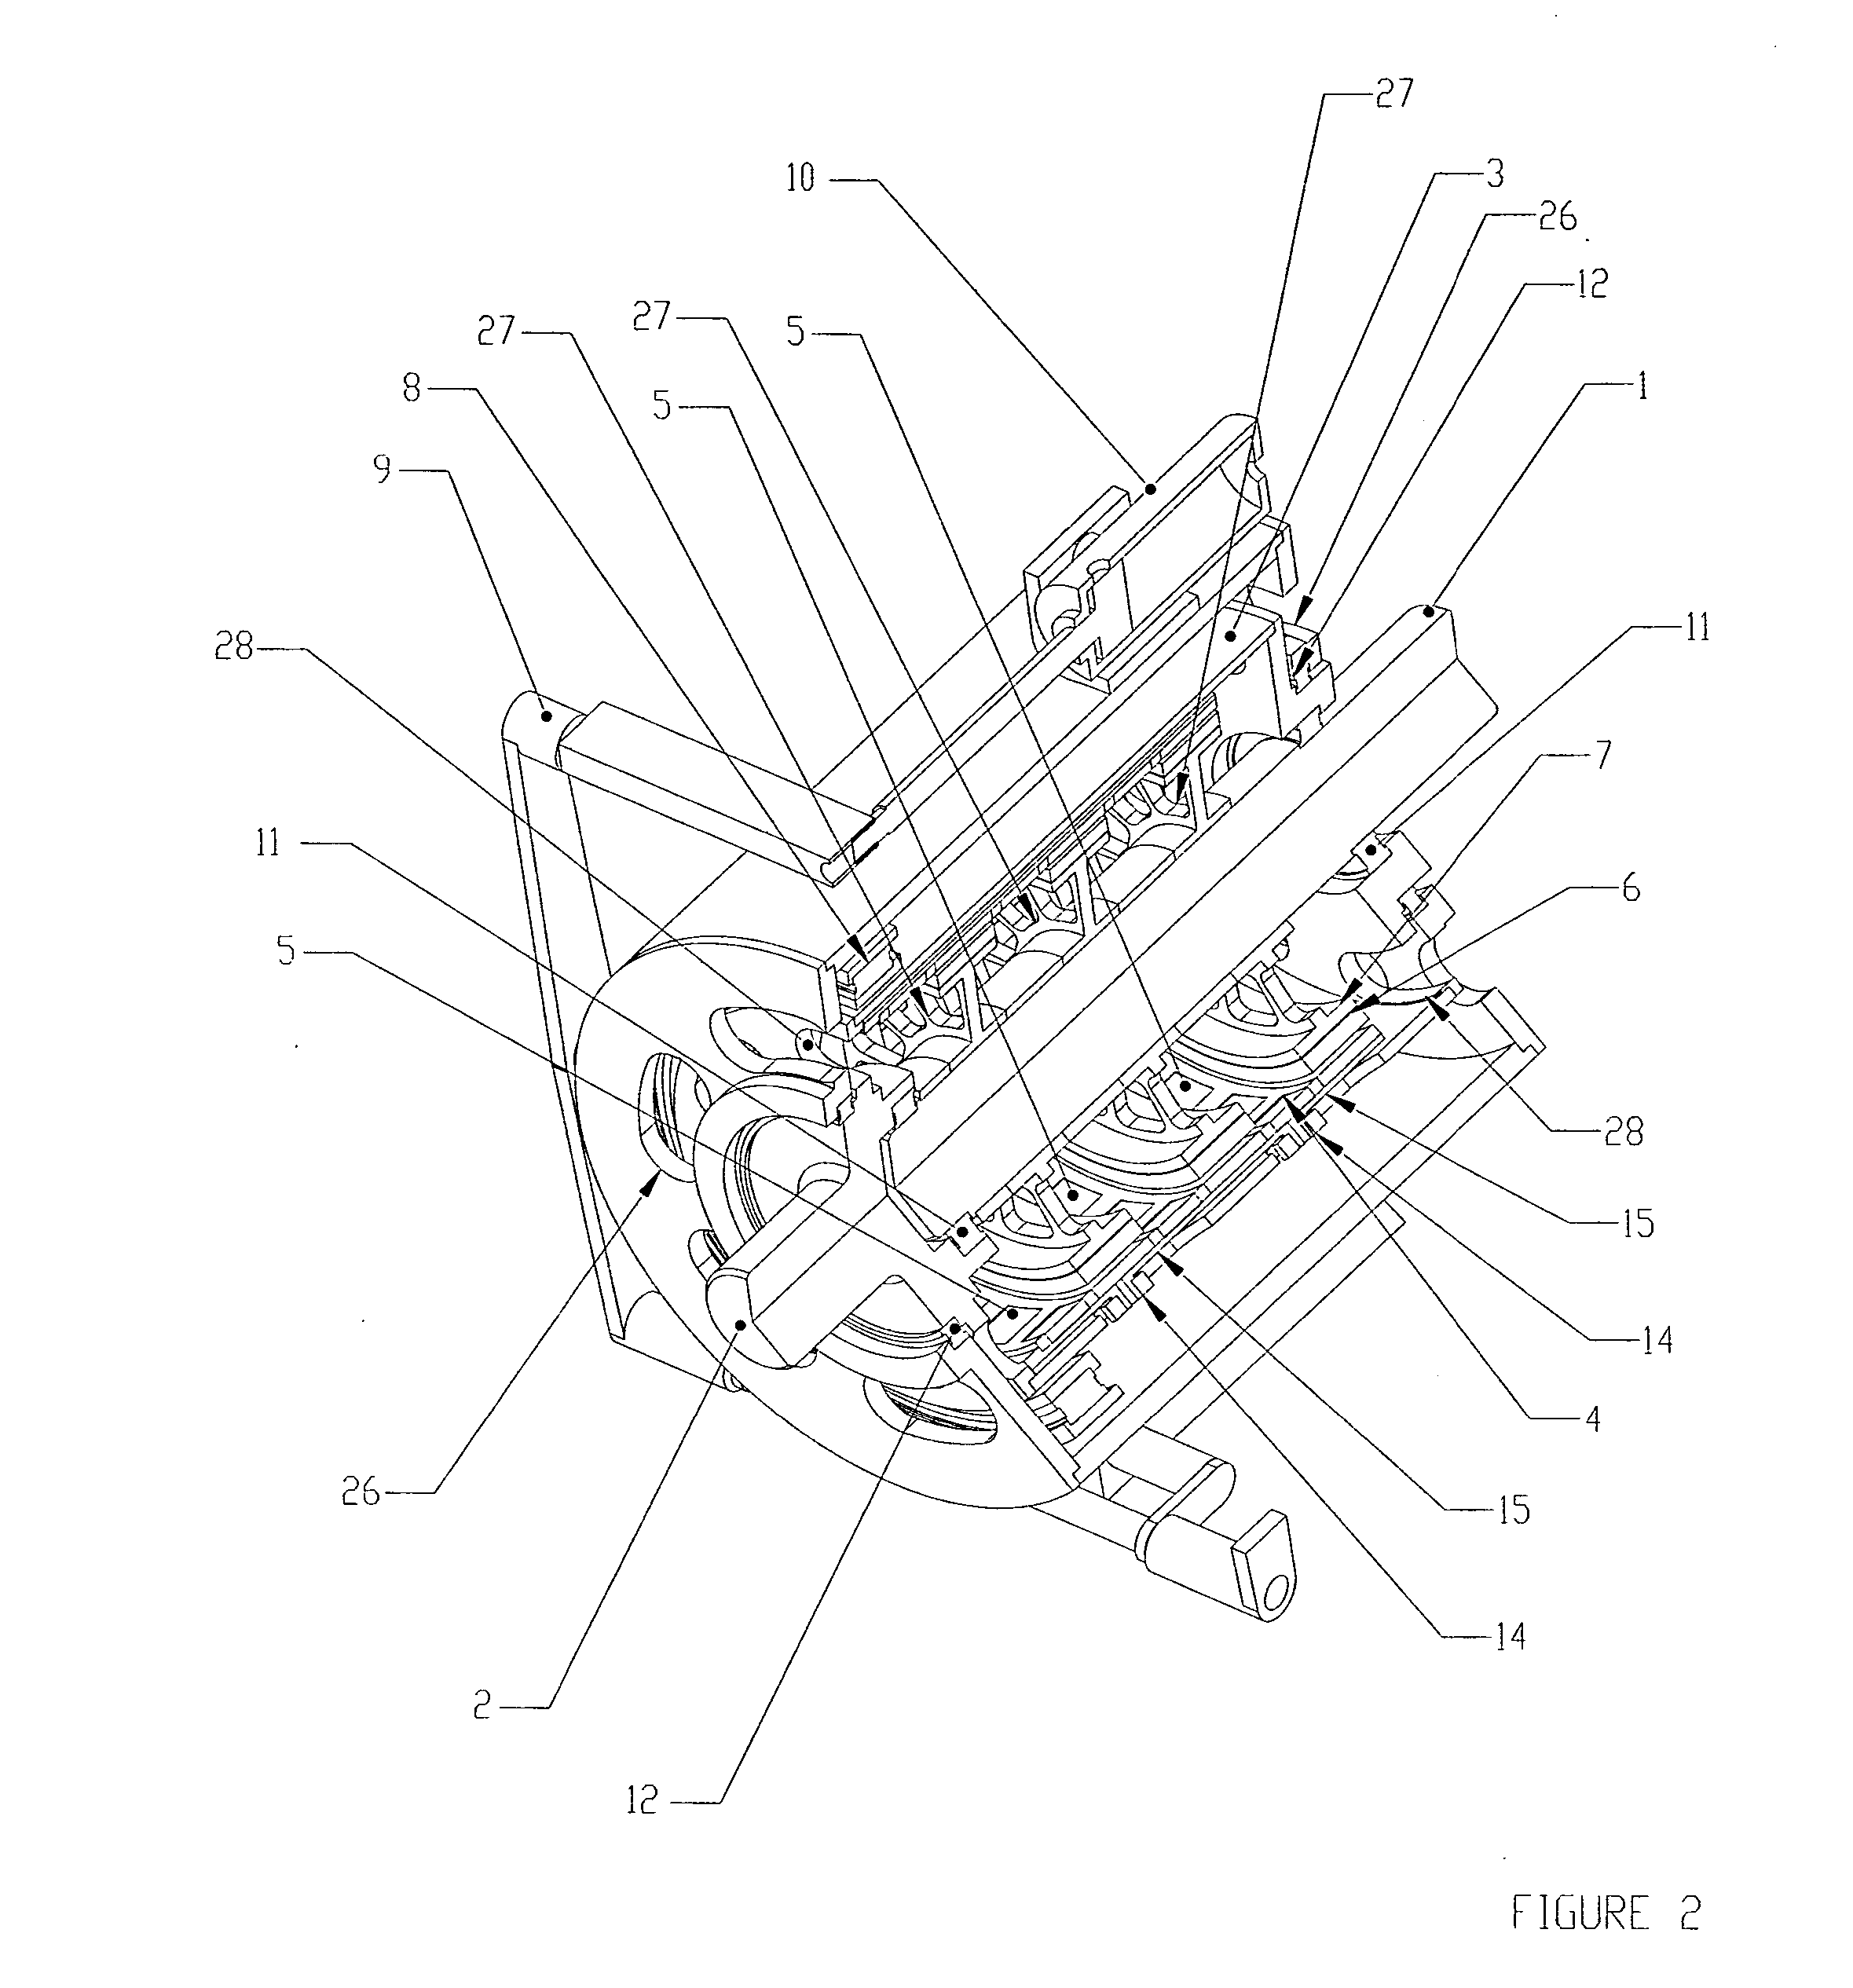 Apparatus for transferring torque magnetically